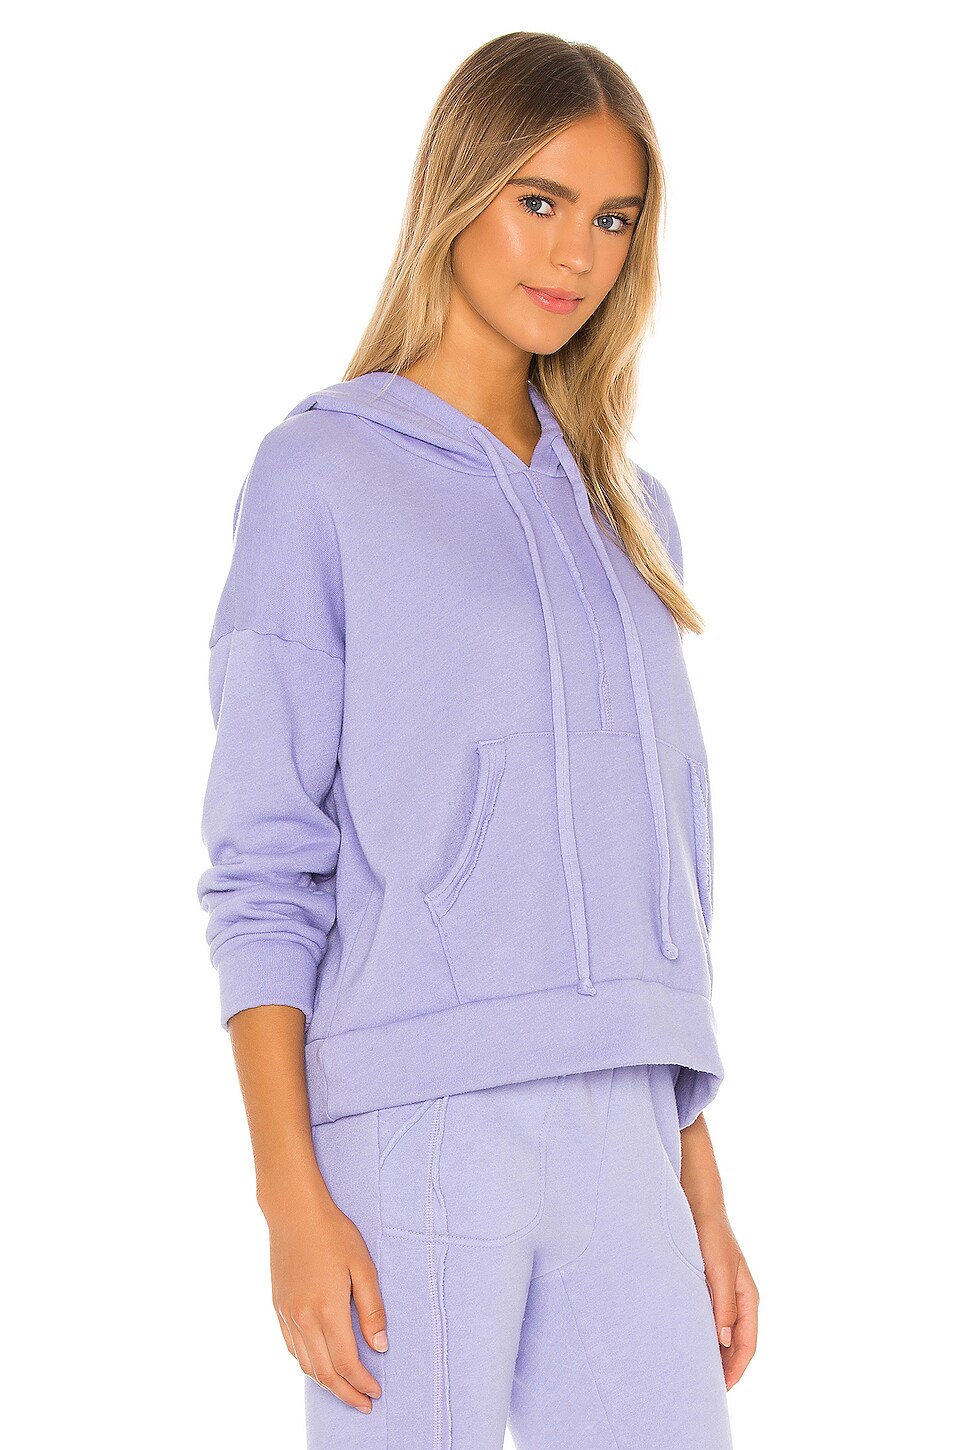 Free People X FP Movement Work It Out Hoodie in Violet Quartz | REVOLVE